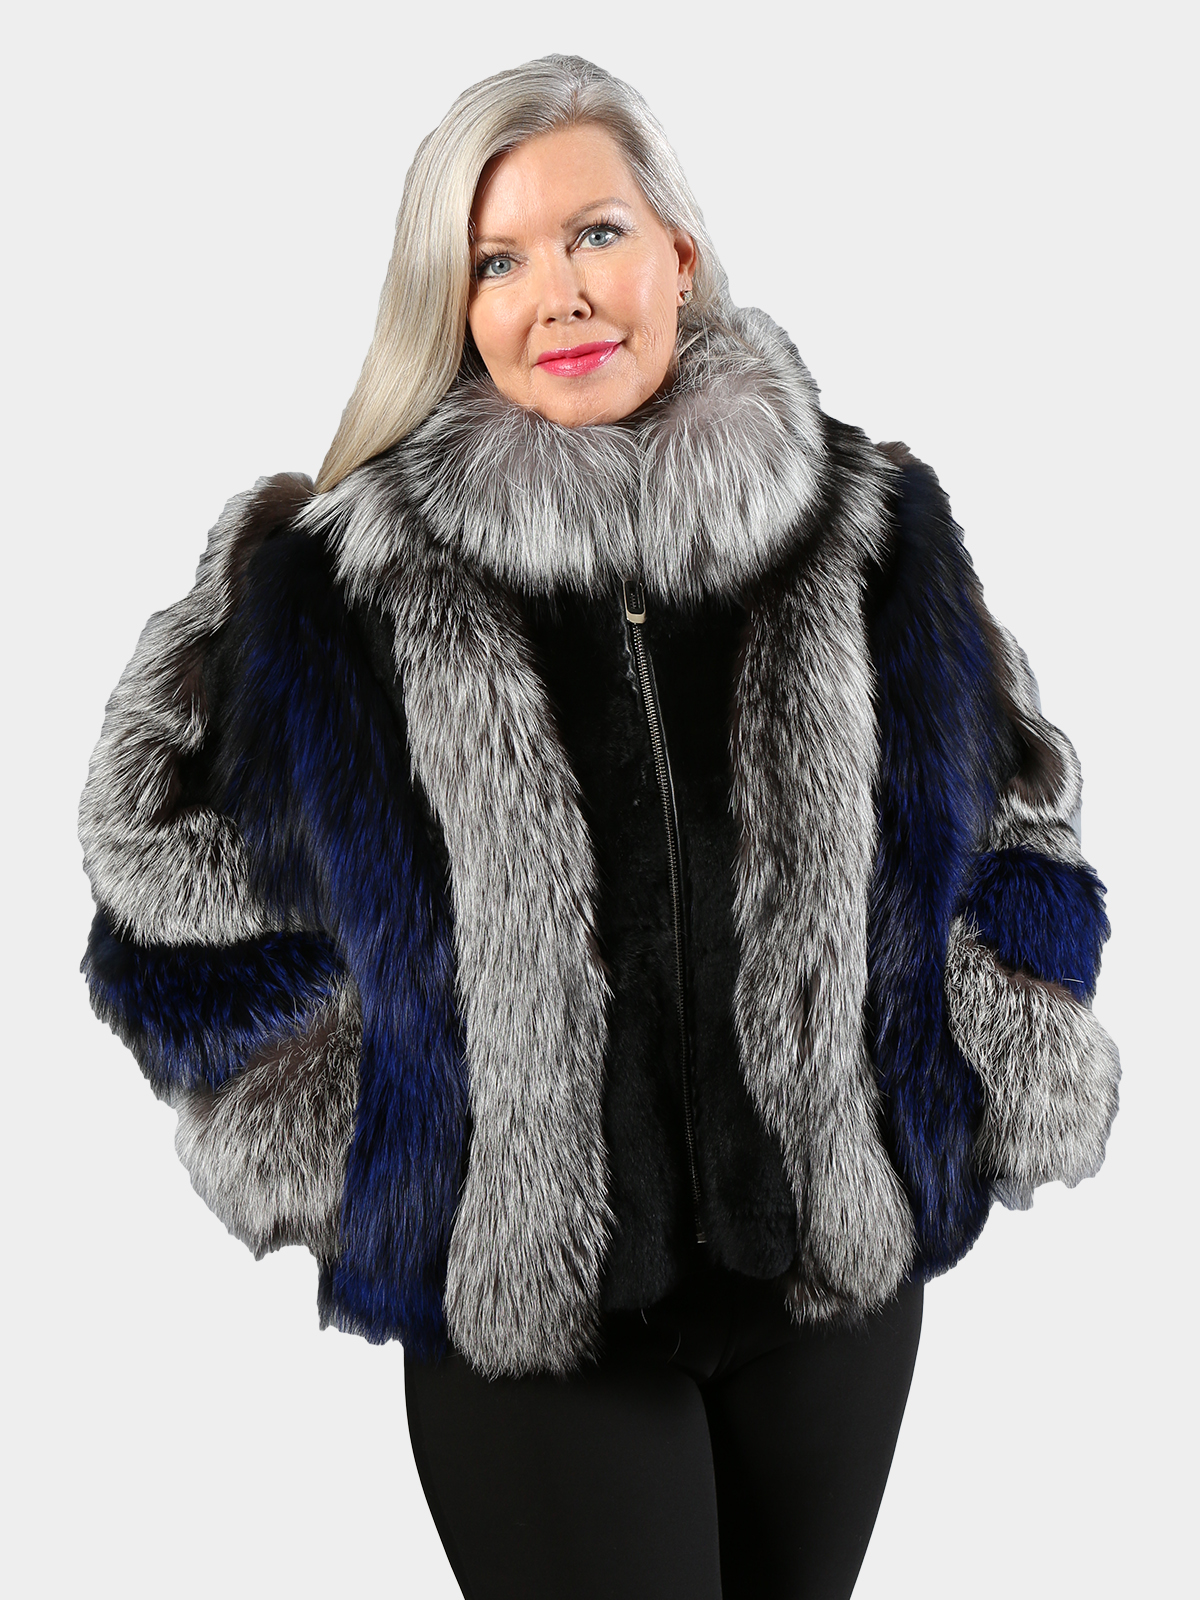 Buy Fox Fur Coat Women's Long Winter Transformer Jacket Short or Long Jacket  Fur Jacket Luxurious Gift for Her. Chic Jackets Womens 460 Online in India  - Etsy